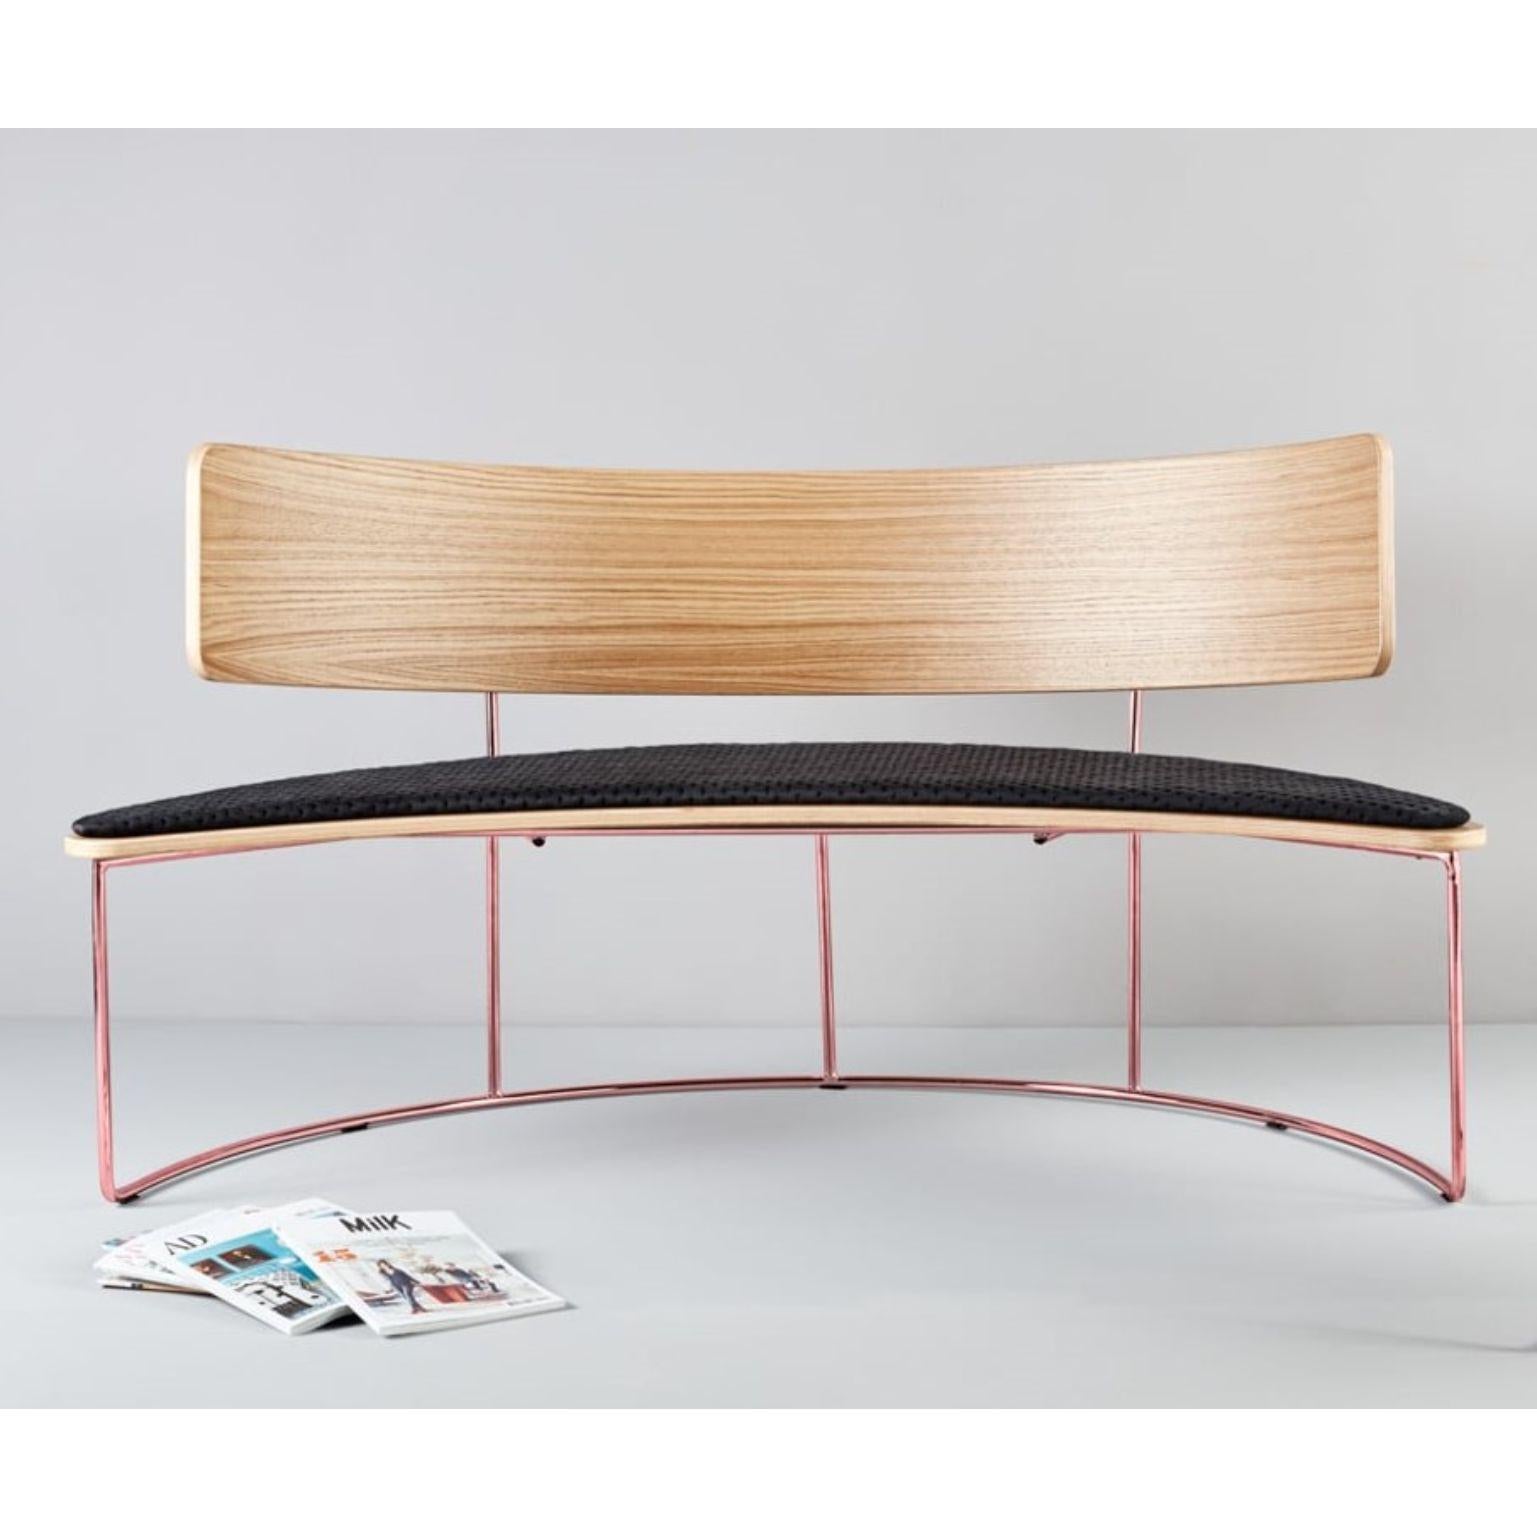 Boomerang bench, black by Pepe Albargues.
Dimensions: W 152, D 72, H 79, seat 43
Materials: Paint coated iron structure / gold / copper or chromed iron structure
Plywood backrest and seat covered with a natural oak wood layer
Upholstered seat